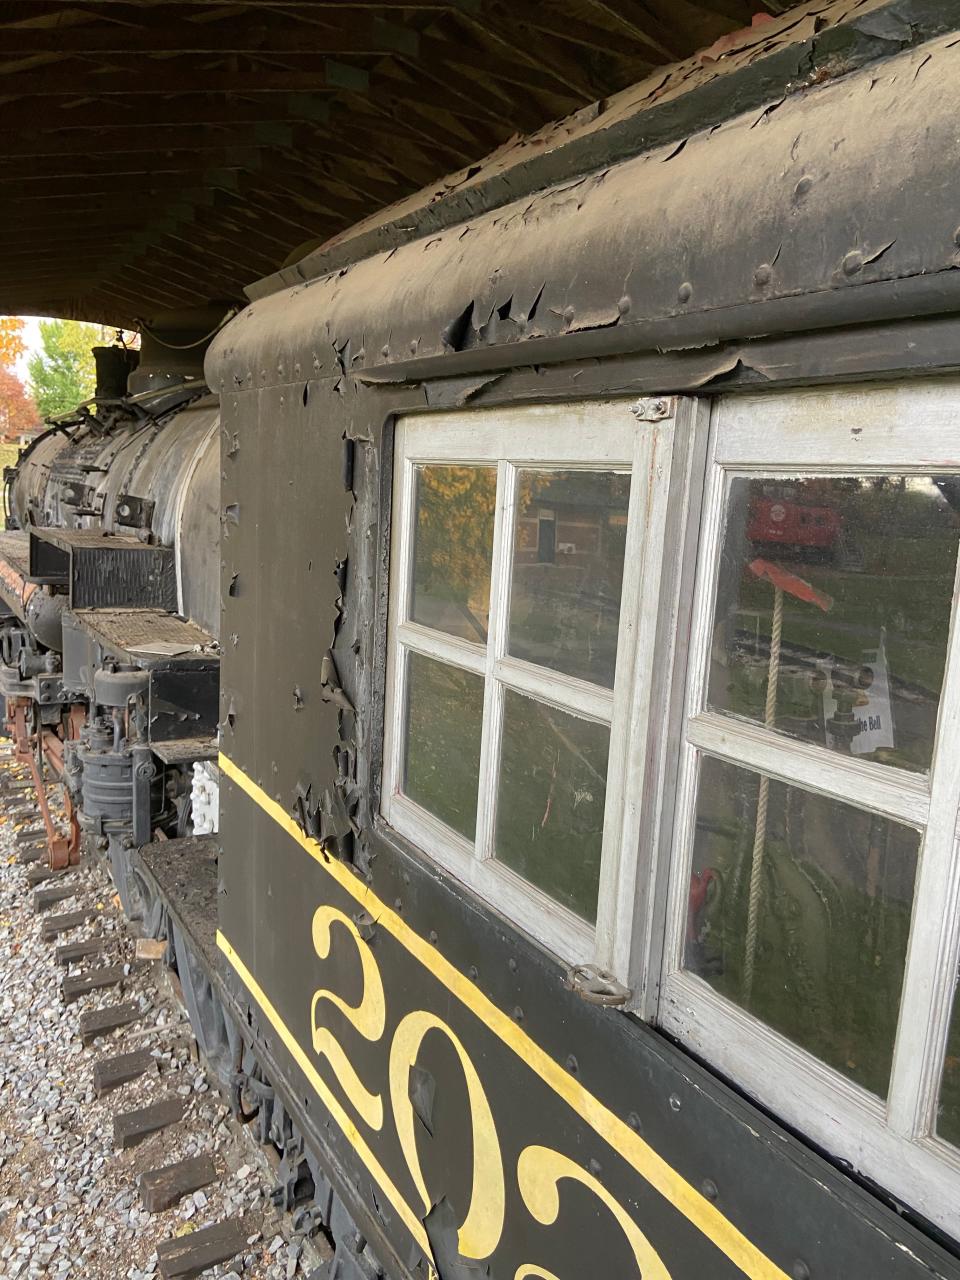 The renovation includes repairing chipped paint and rusting hardware that will restore engine 202 to look as it did when it was donated back in 1952.